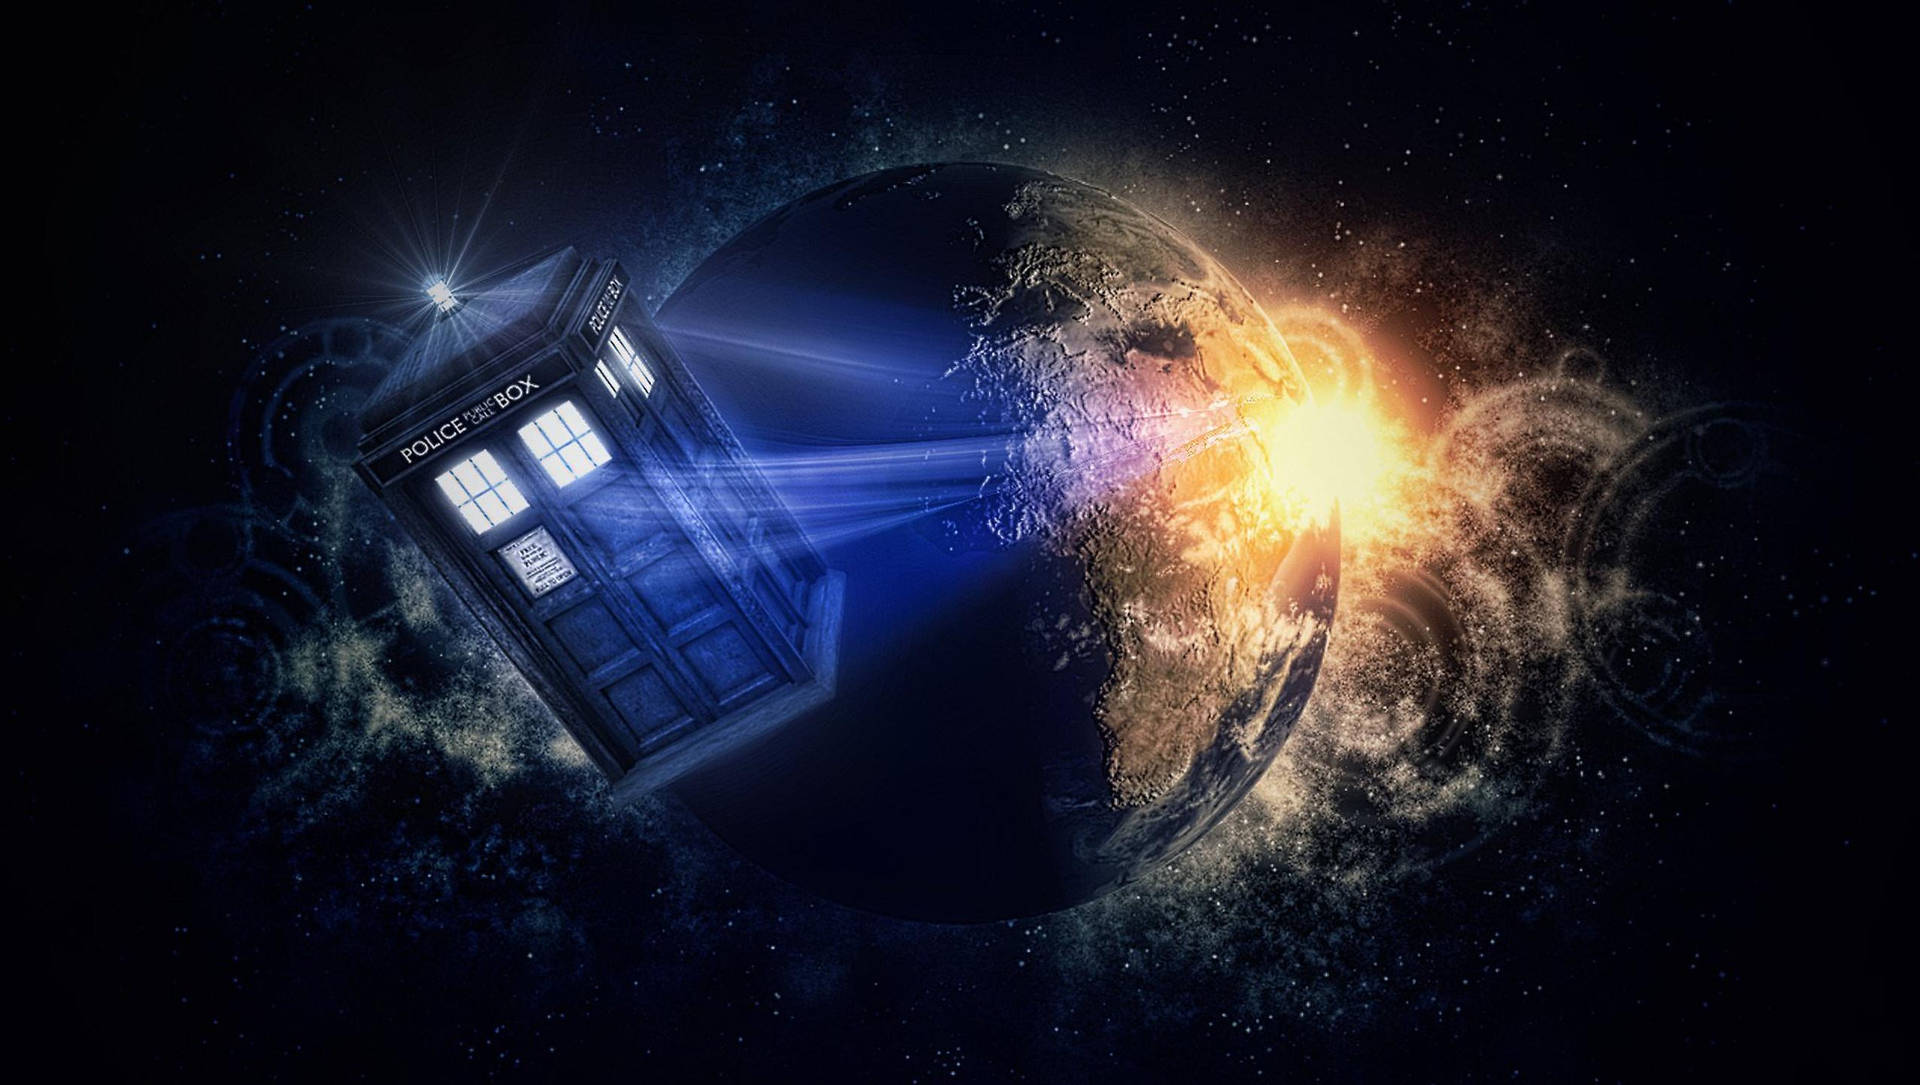 Free Doctor Who Wallpaper Downloads, [100+] Doctor Who Wallpapers for FREE  